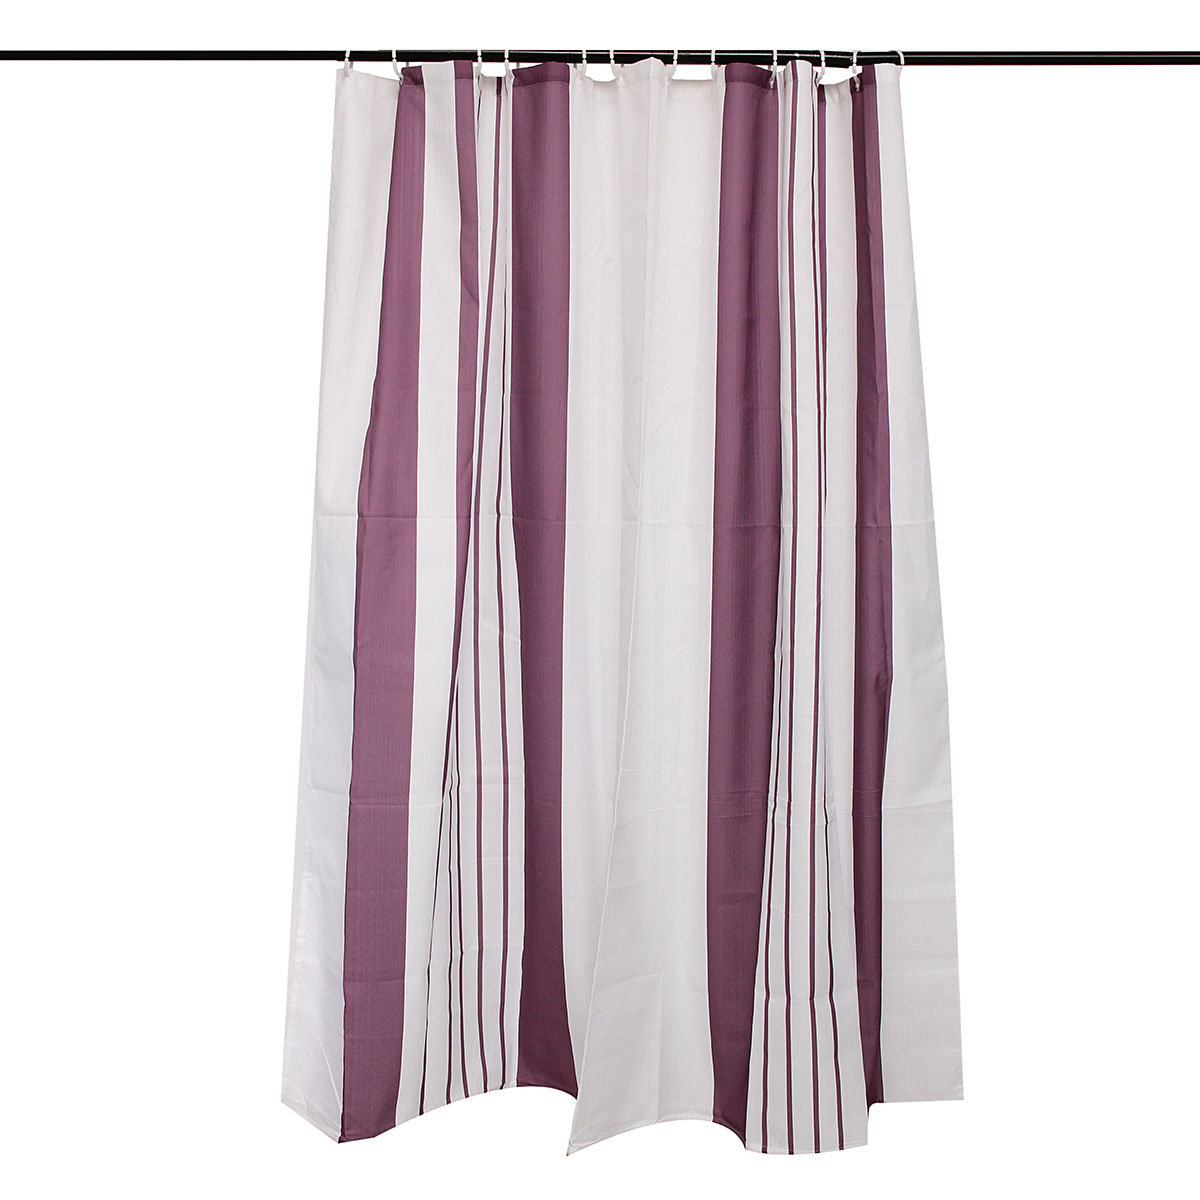 180x180cm Purple Stripes Polyester Fabric Waterproof Shower Curtain With 12 Hooks